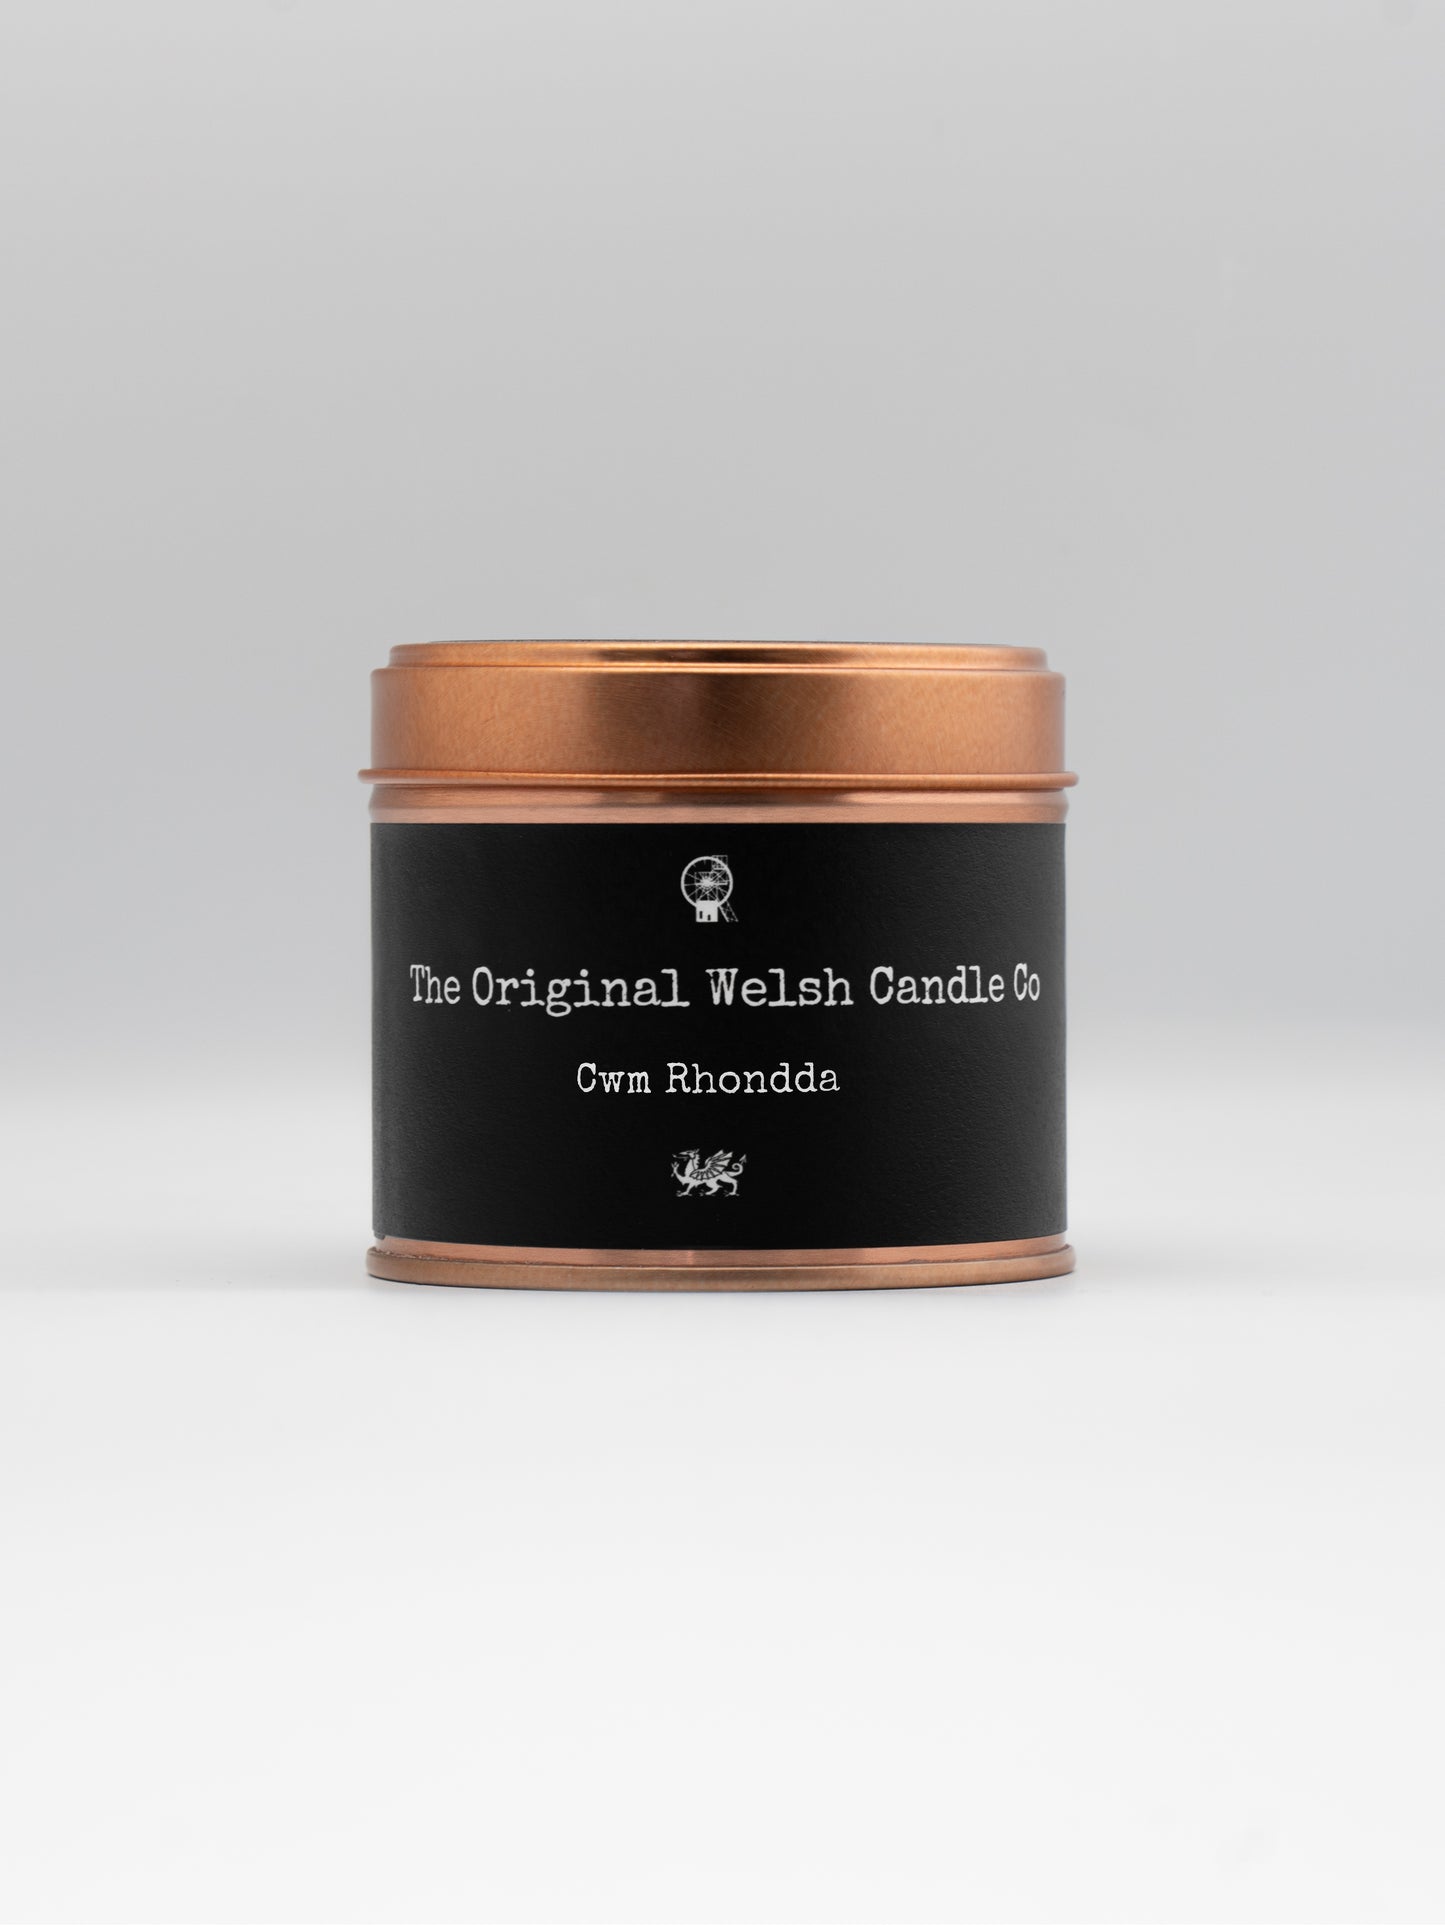 Lovely copper tin with black label very classy filled with a fresh linen soy wax